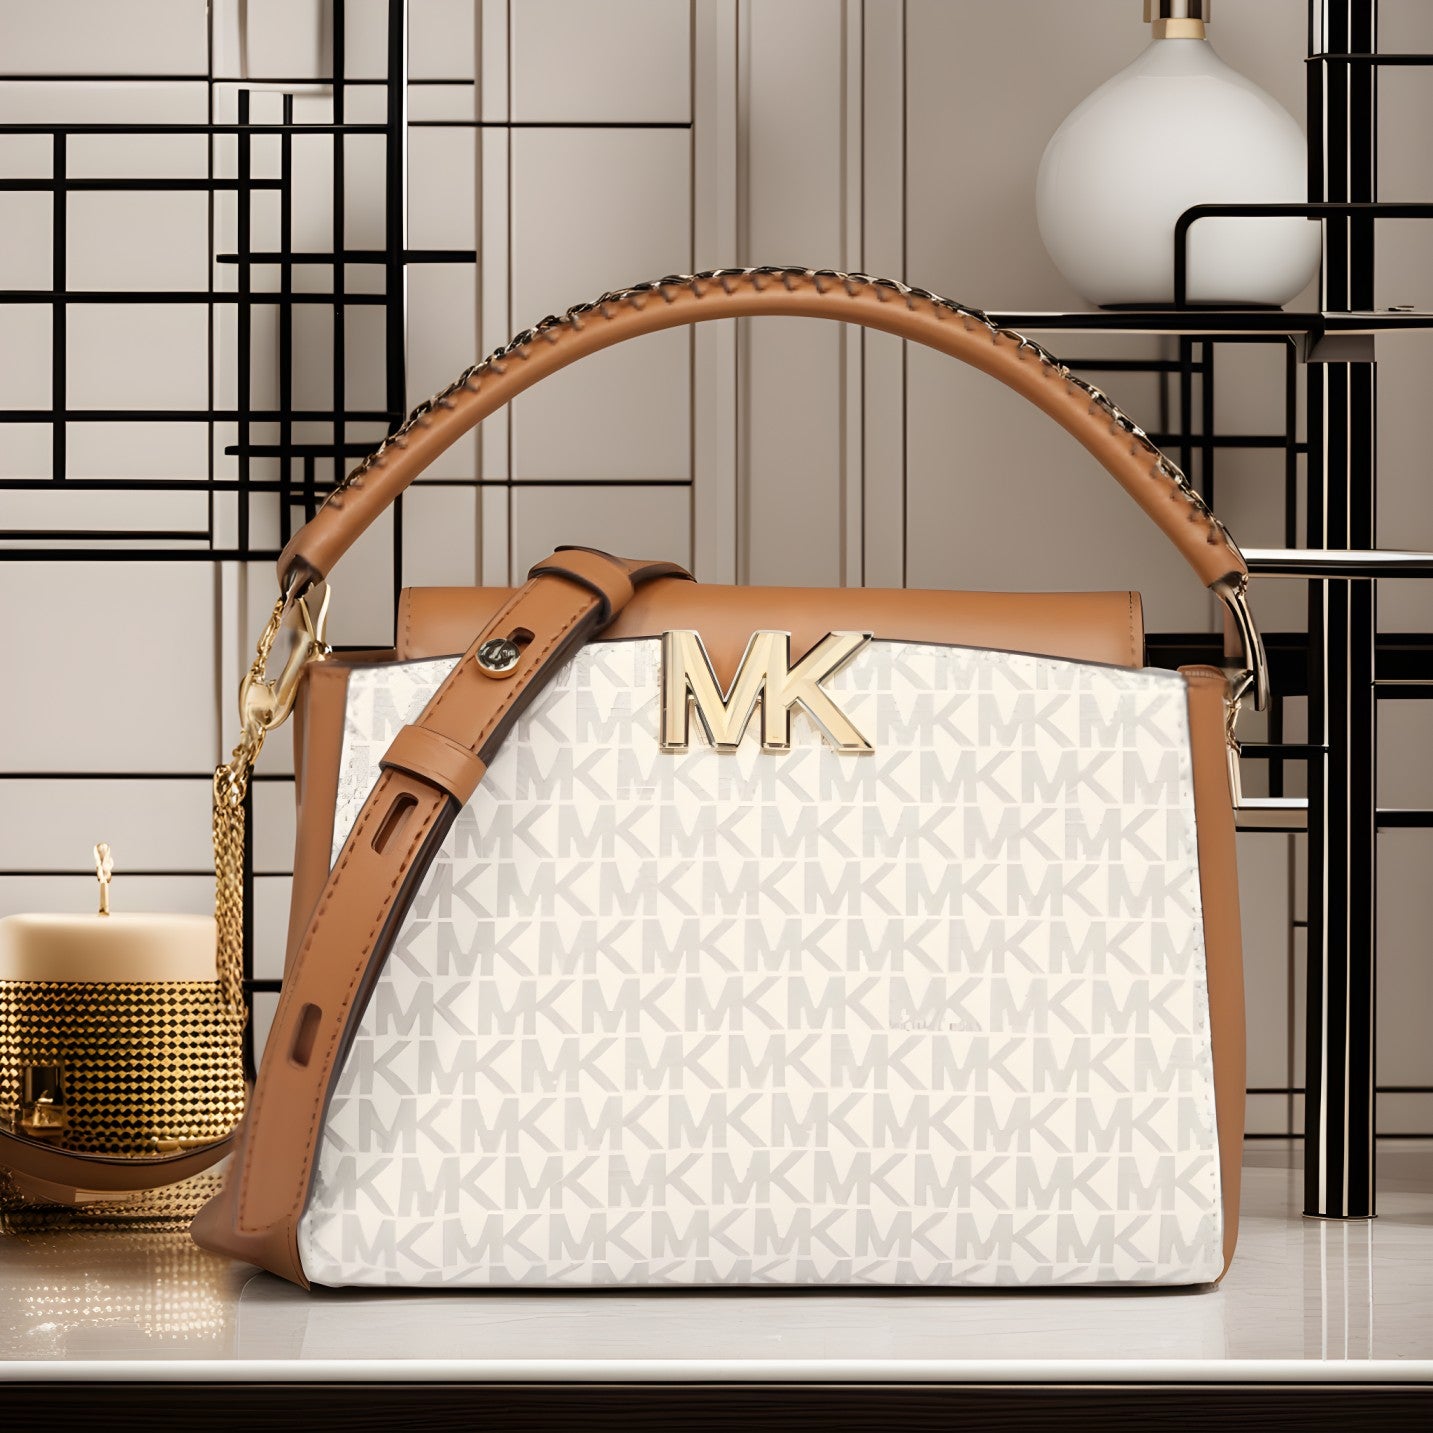 Why the hate for Michael Kors? : r/handbags